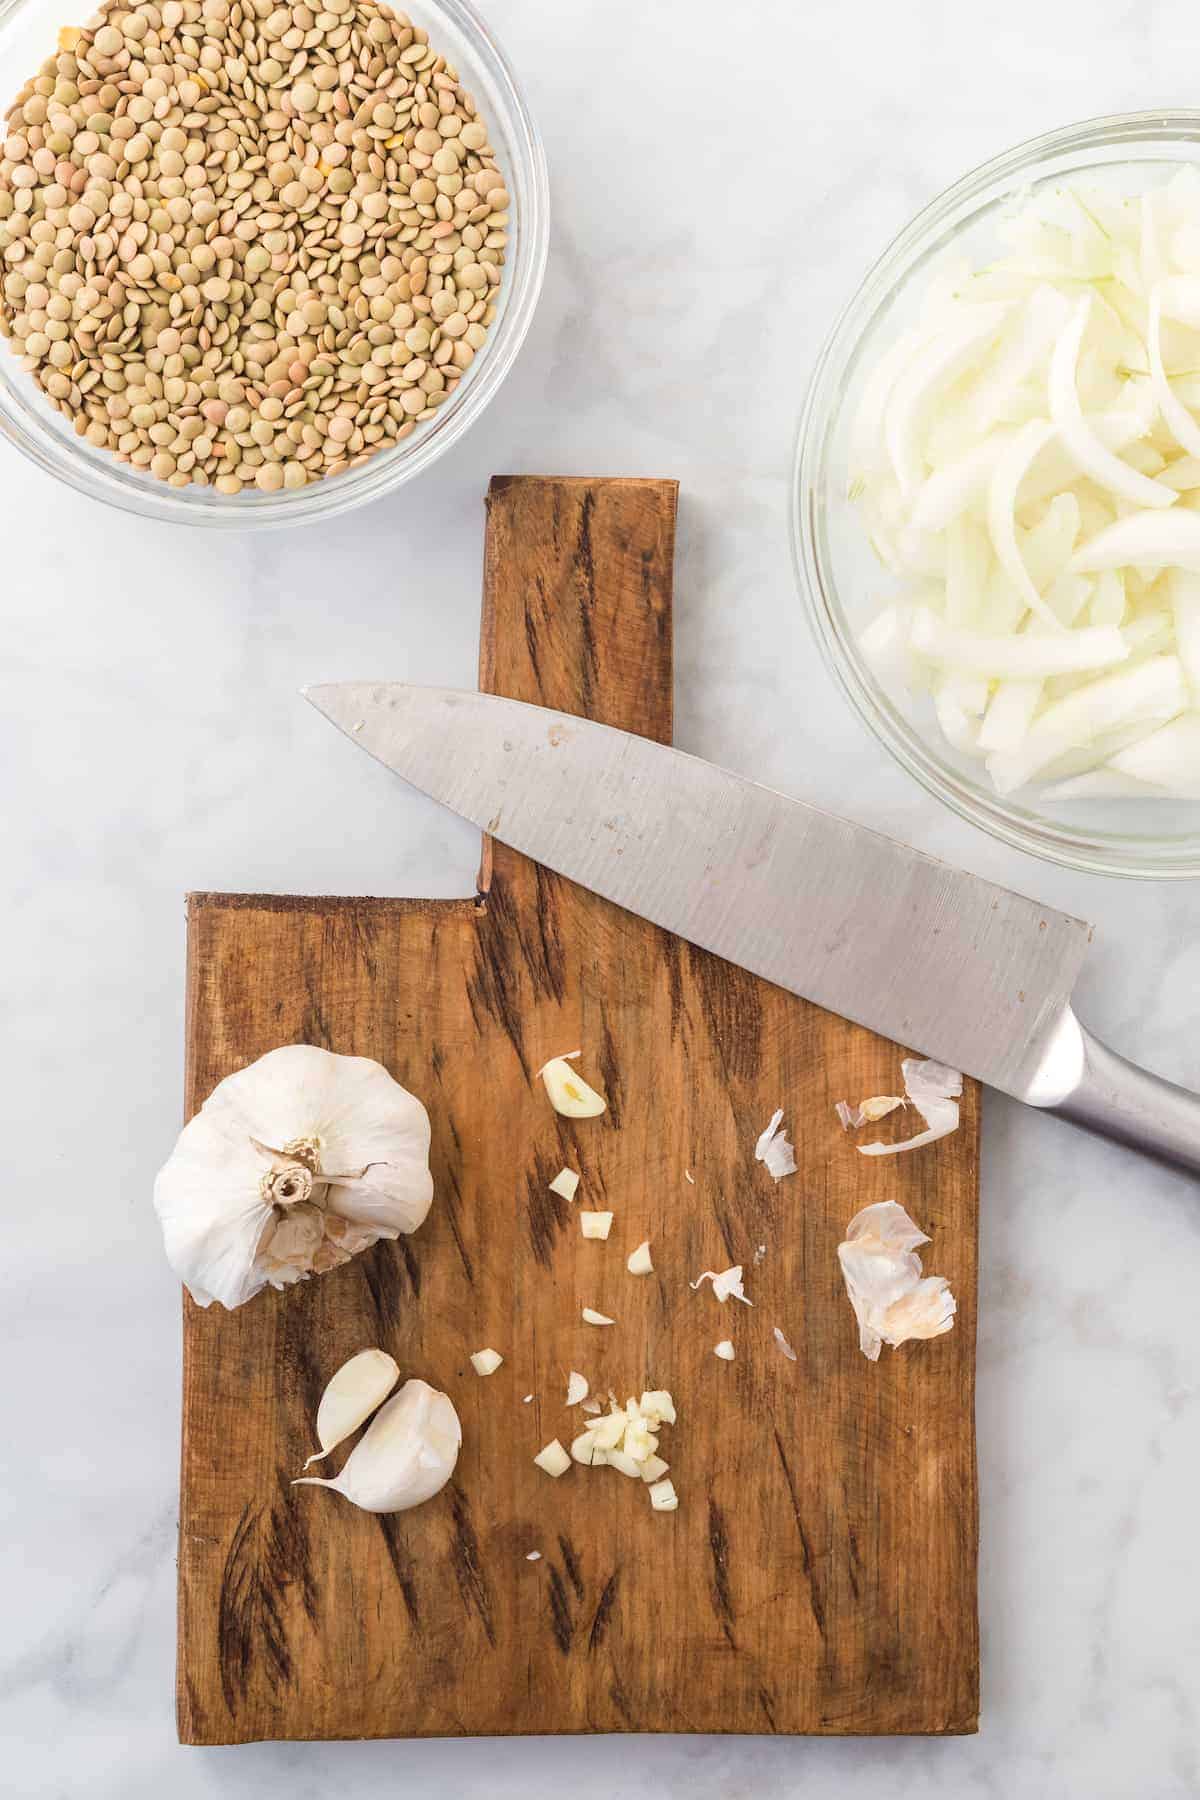 chopping the garlic on a cutting board with the onions and lentils in bowls in the background